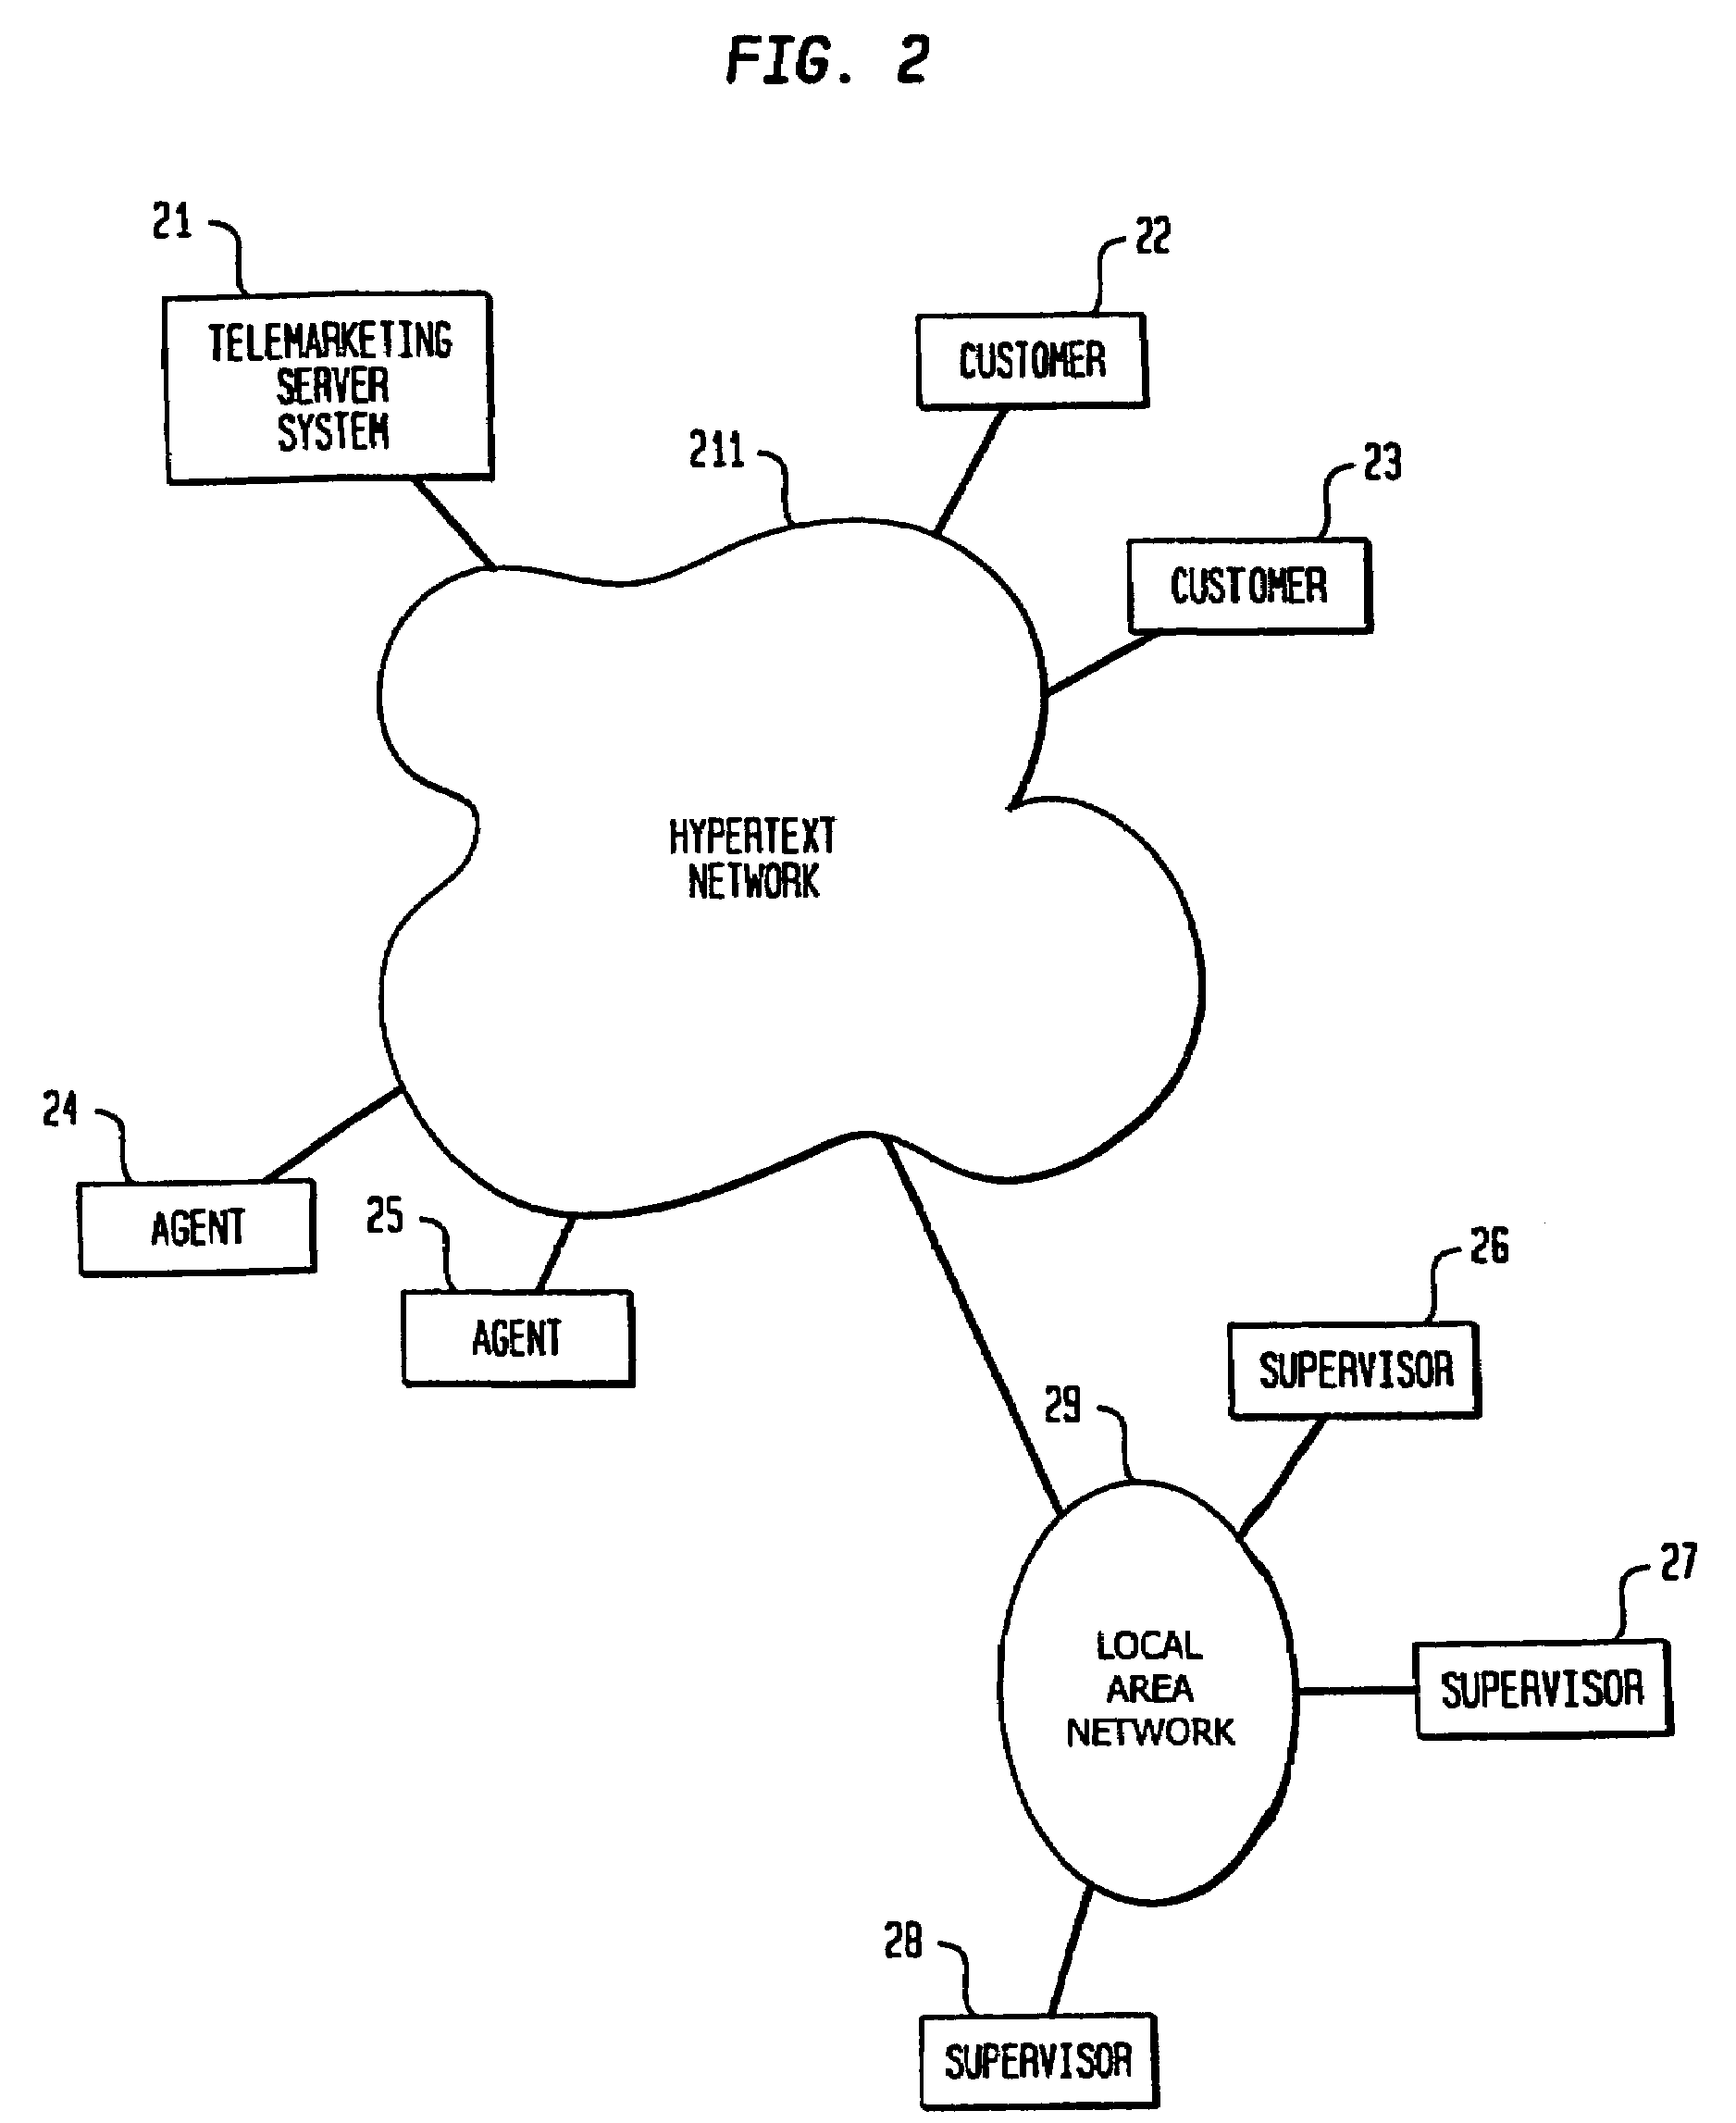 System and method for telemarketing through a hypertext network